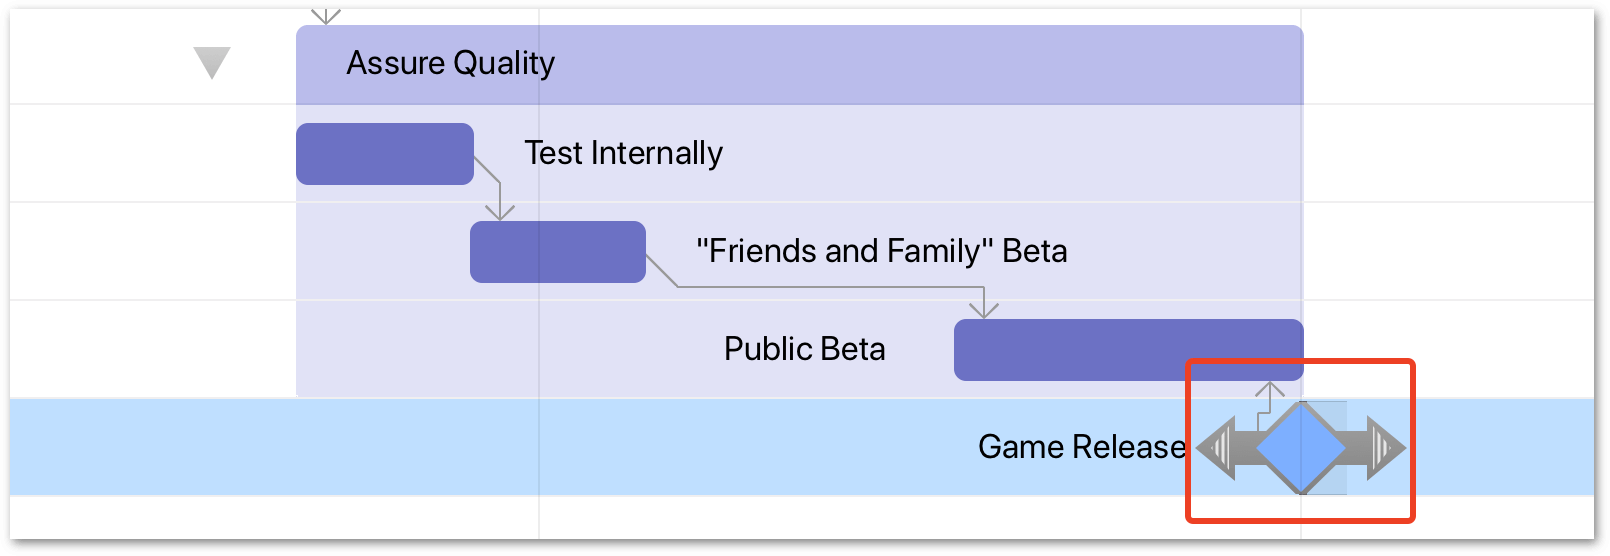 A highlight is placed around the Game Release milestone, which now has a dependency tied from its start to the end of the Public Beta task.